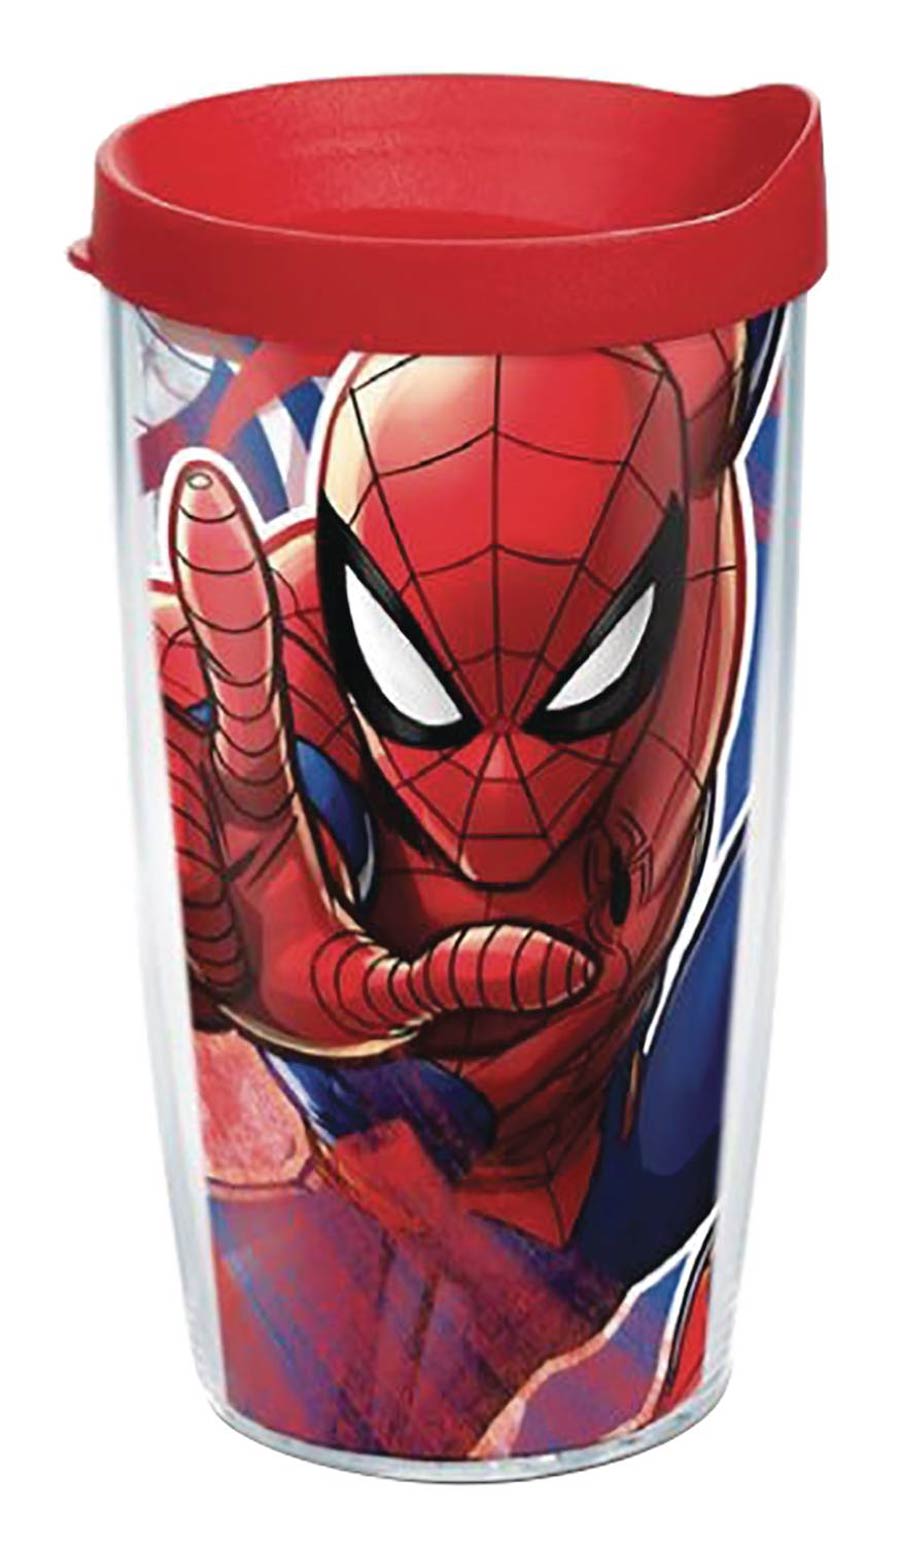 Marvel Heroes Iconic 16-Ounce Tumbler With Lid - Spider-Man